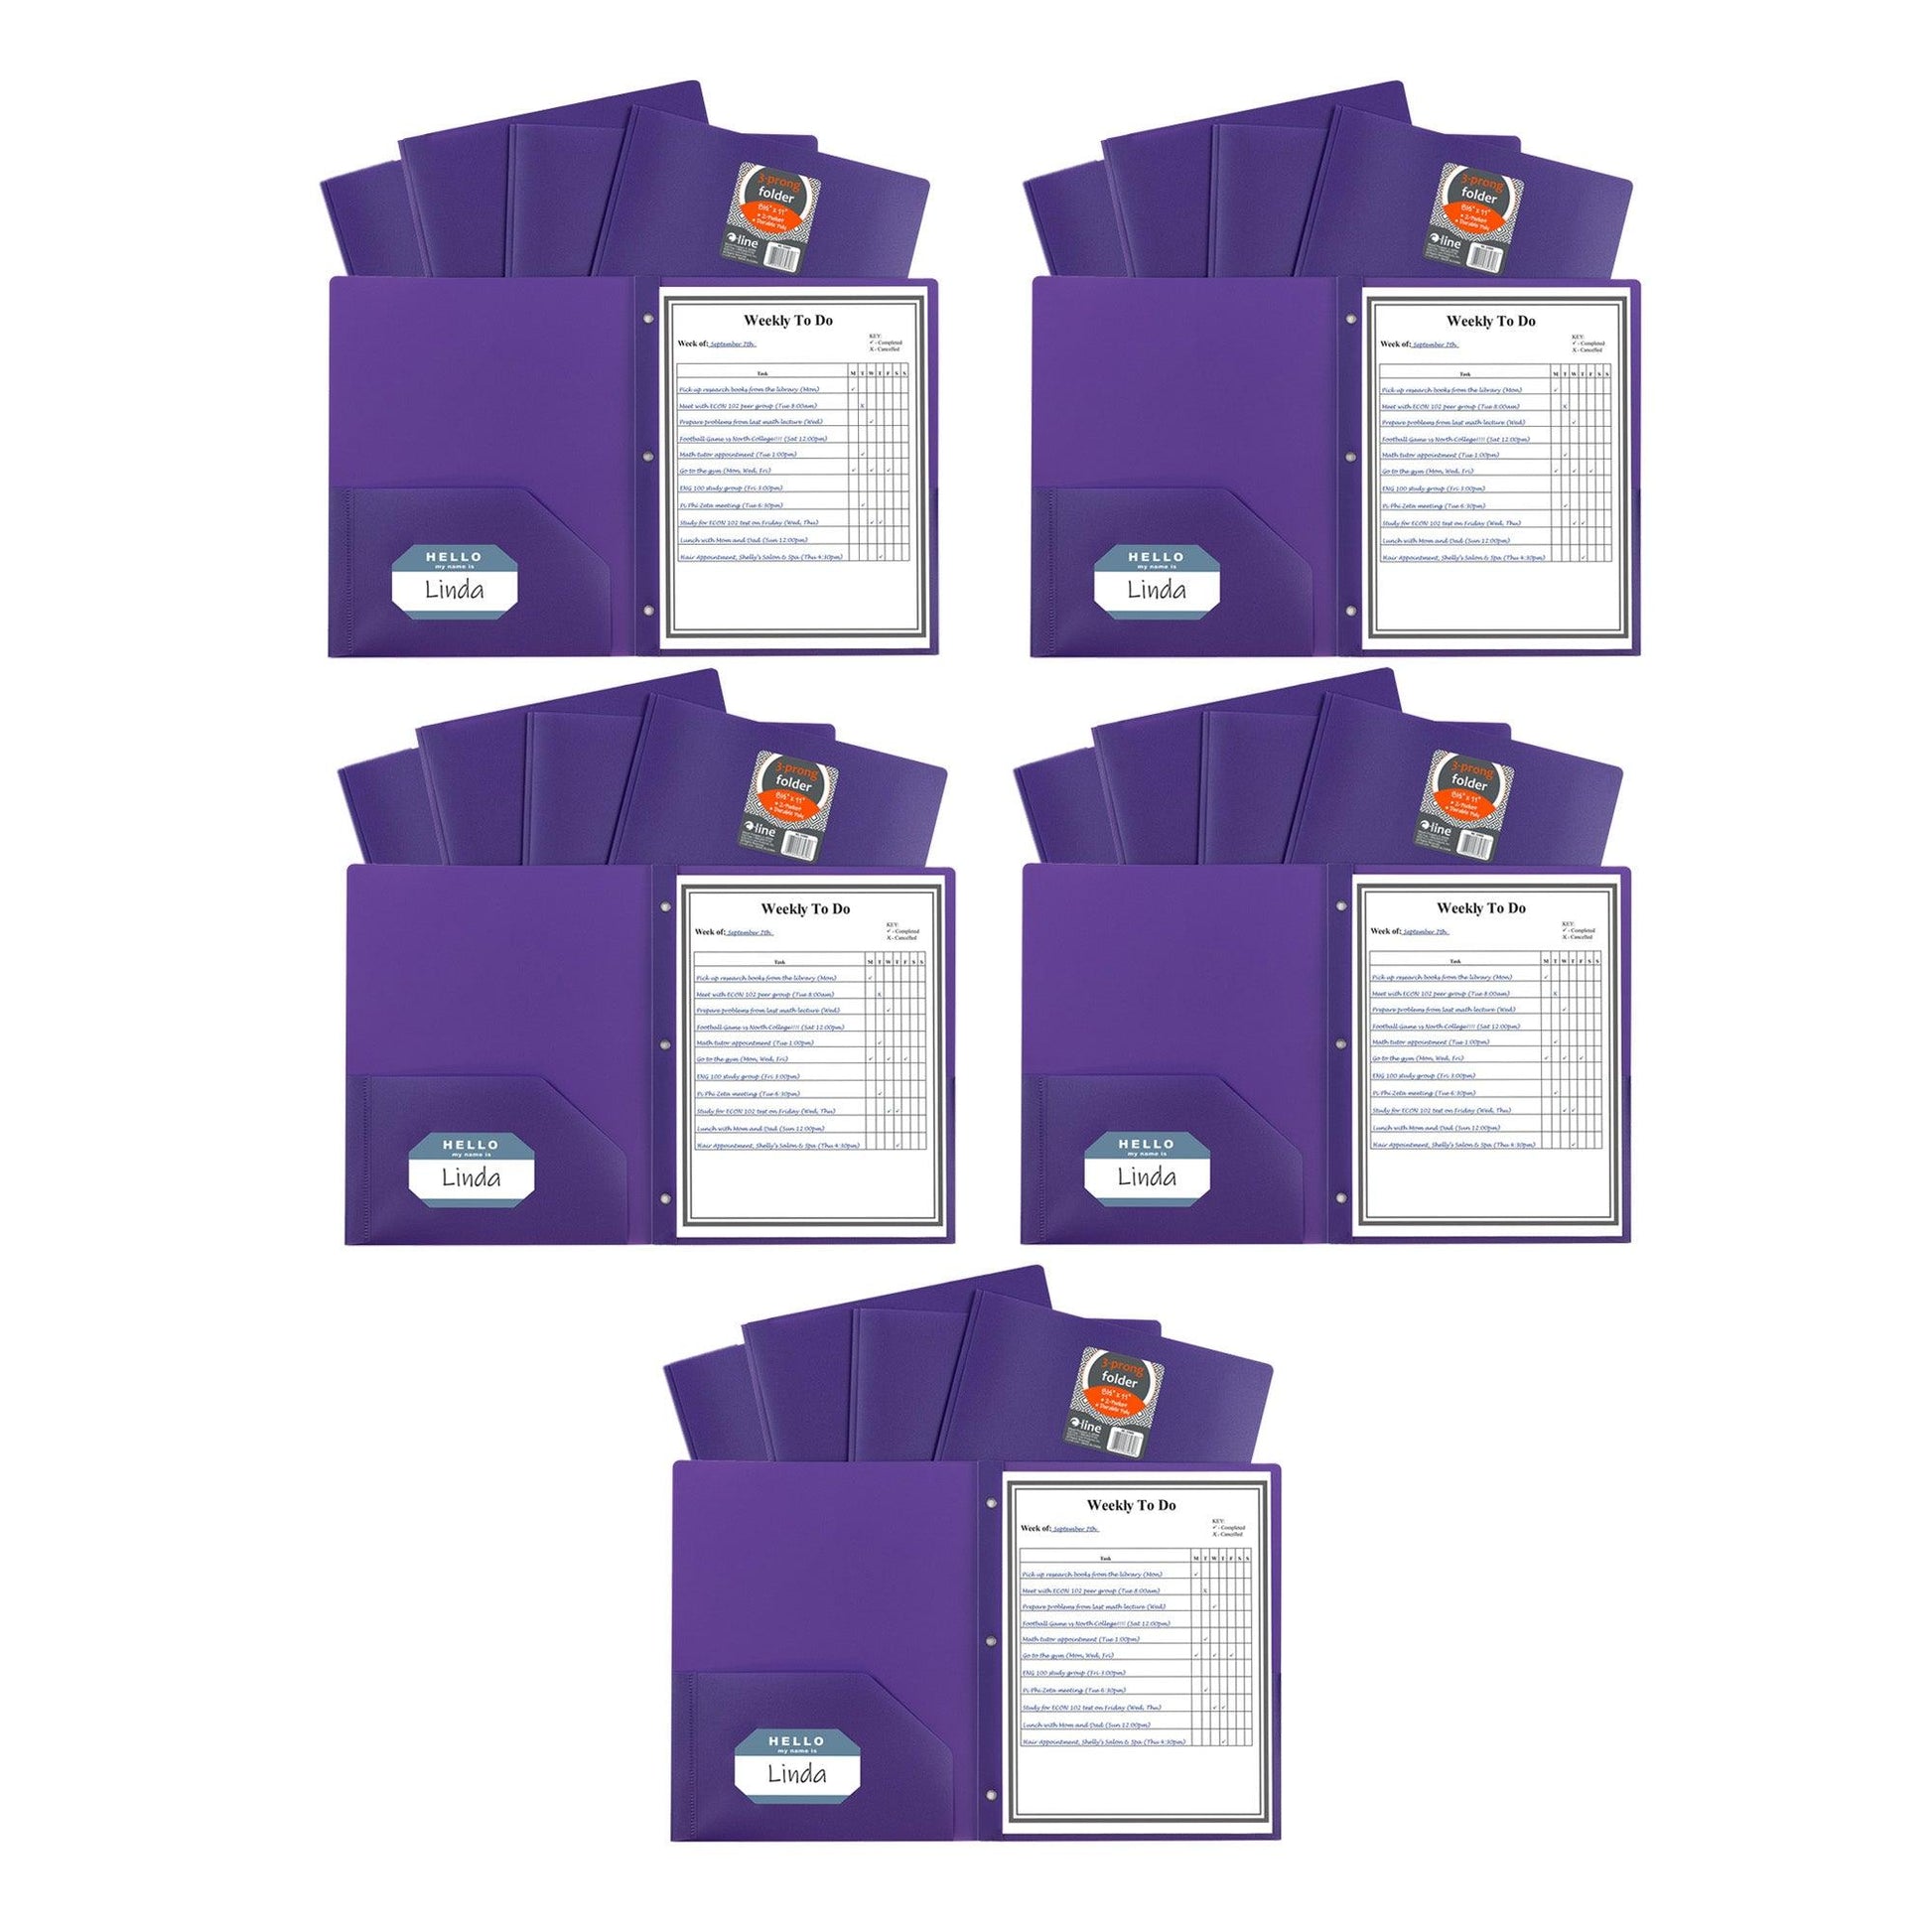 Two-Pocket Heavyweight Poly Portfolio Folder with Prongs, Purple, Pack of 25 - Loomini